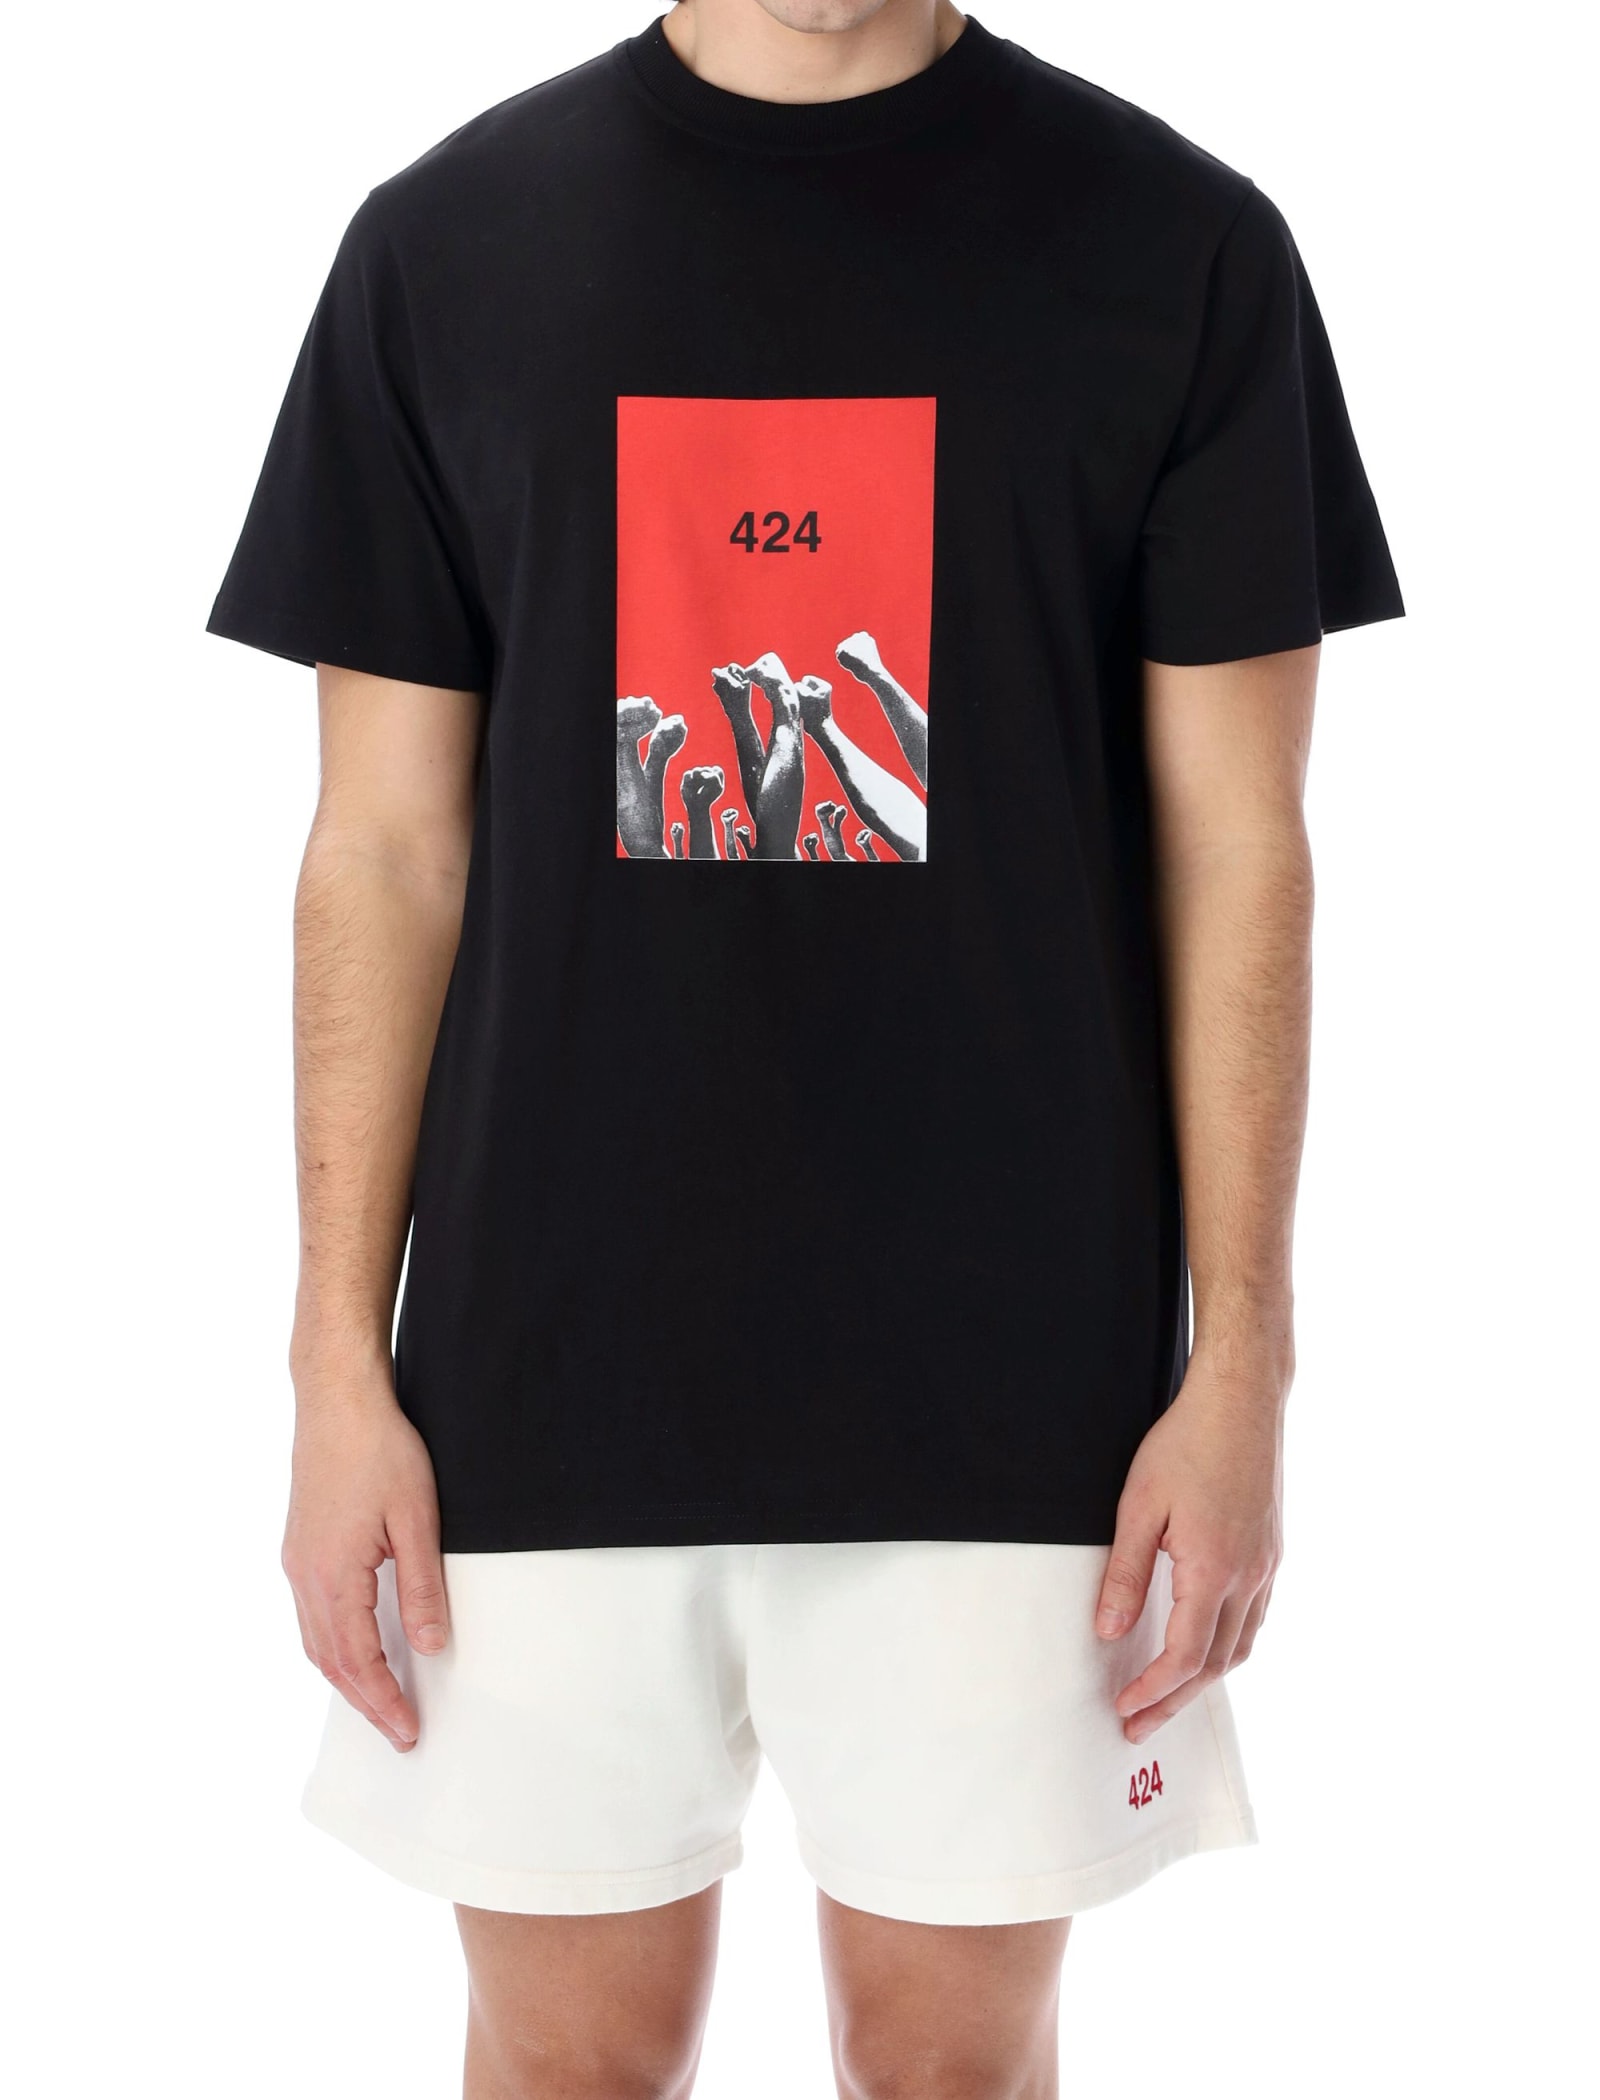 FourTwoFour on Fairfax People T-shirt